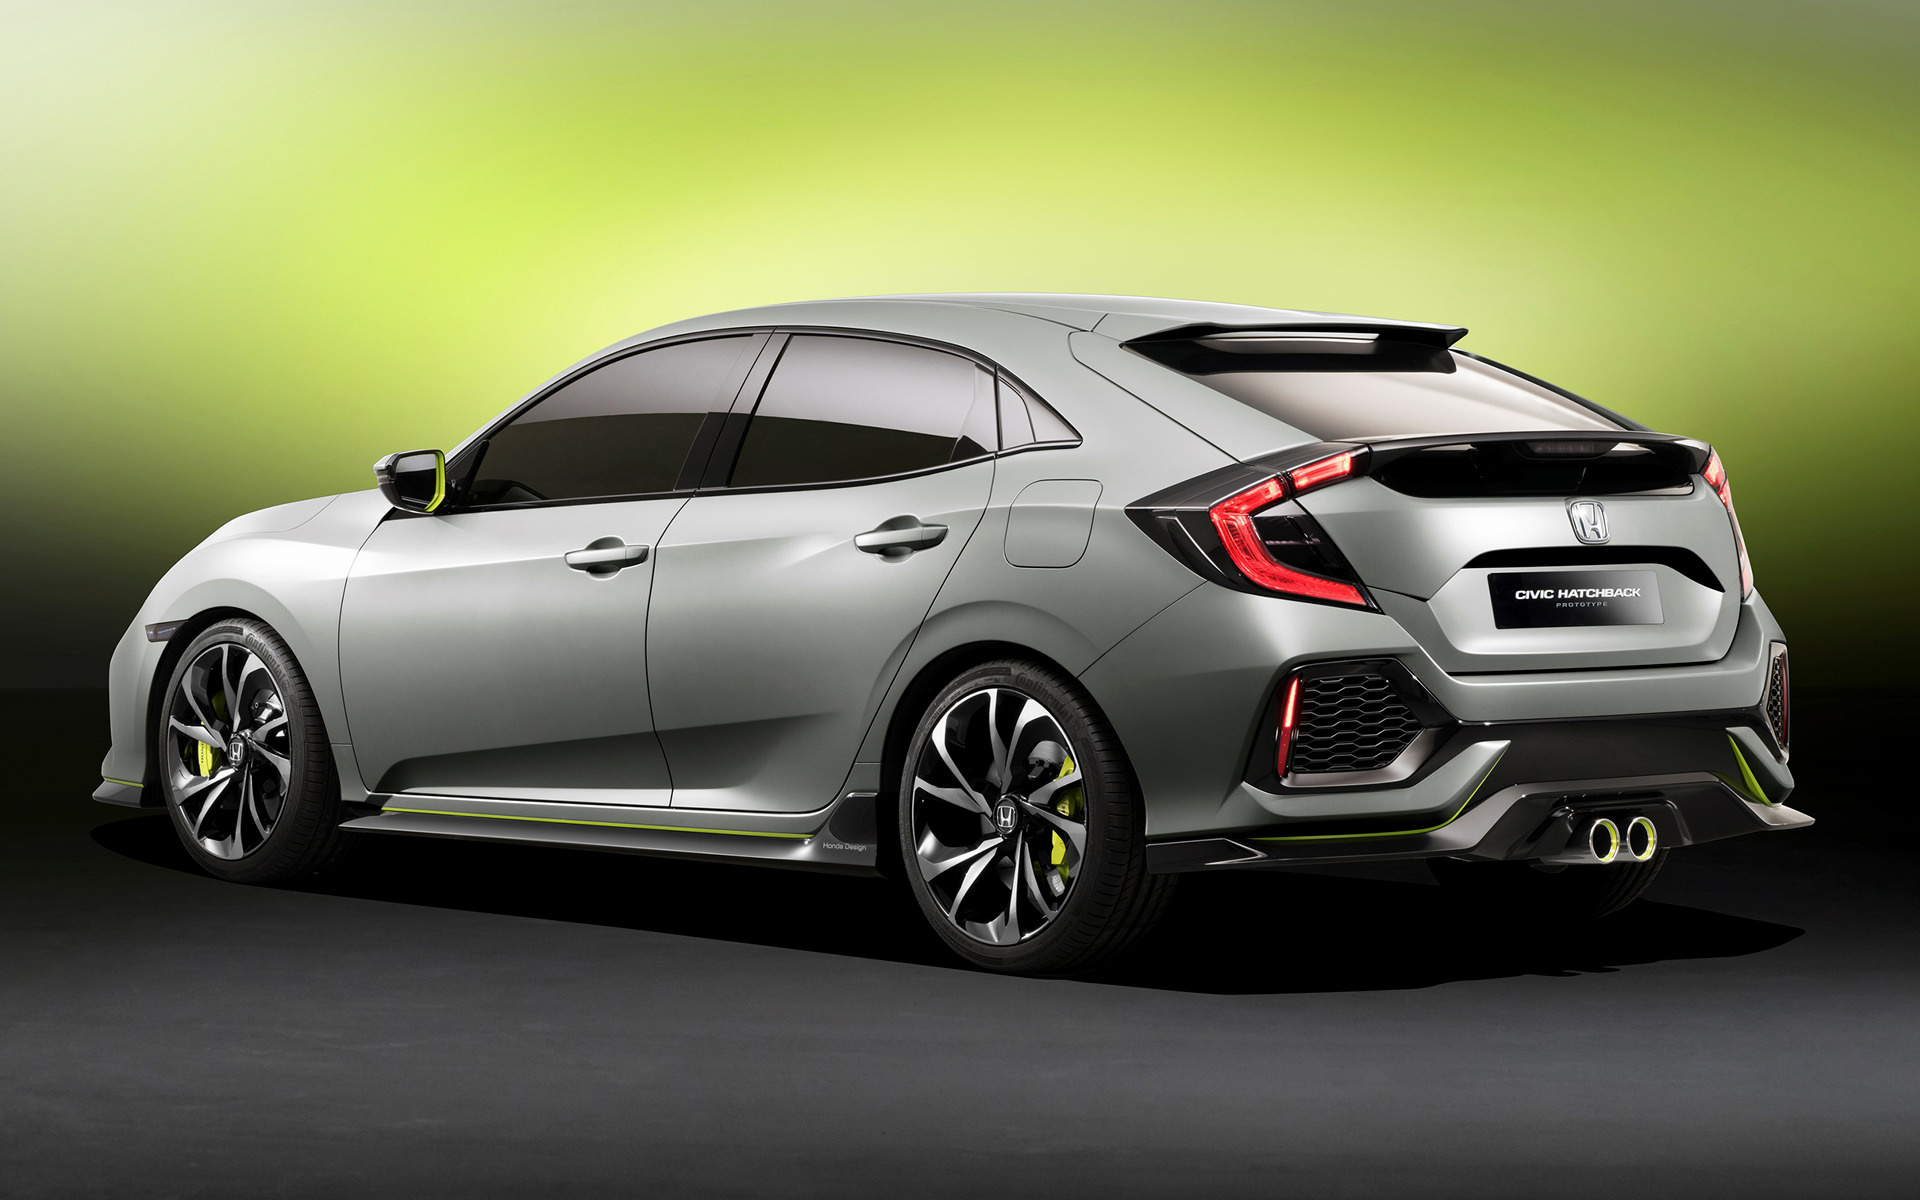 Honda Civic Hatchback Prototype Wallpapers And Hd Images - Honda Civic Hatchback 2017 Mods - HD Wallpaper 